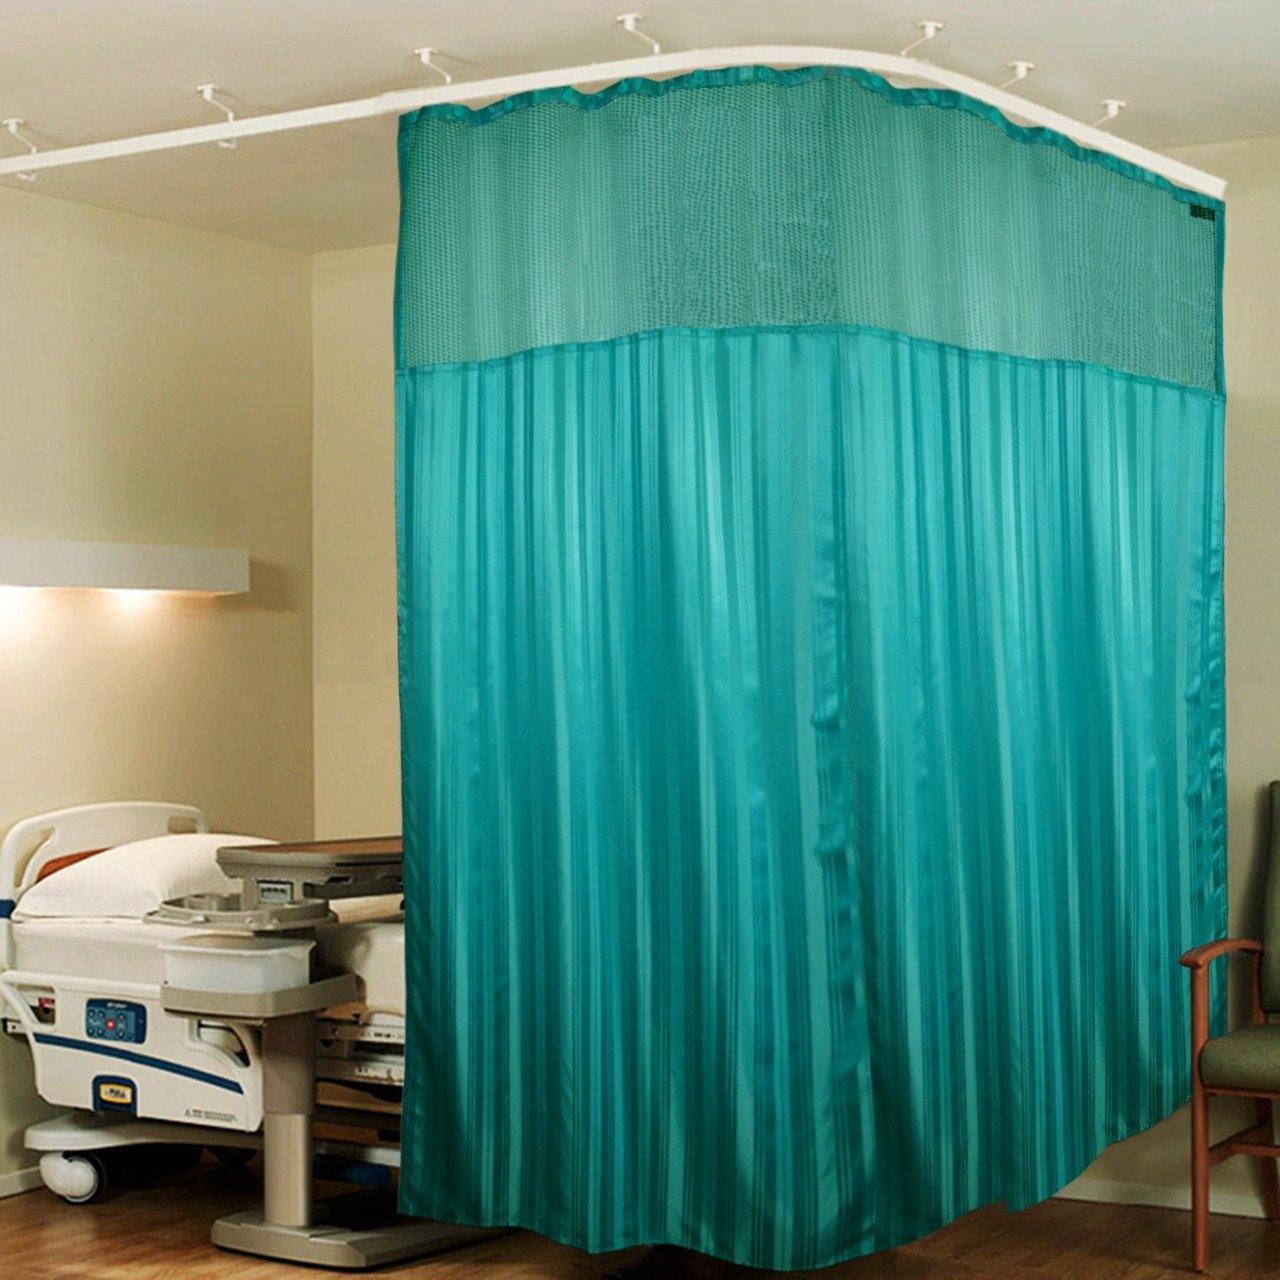 Lushomes Full Sized Dark Green Stripres ICU Bed Partion Hospital Curtain with 24 Eyelets and 24 C-Hooks and Net(12Ft x 7Ft, 3 Panels Attached) - Lushomes